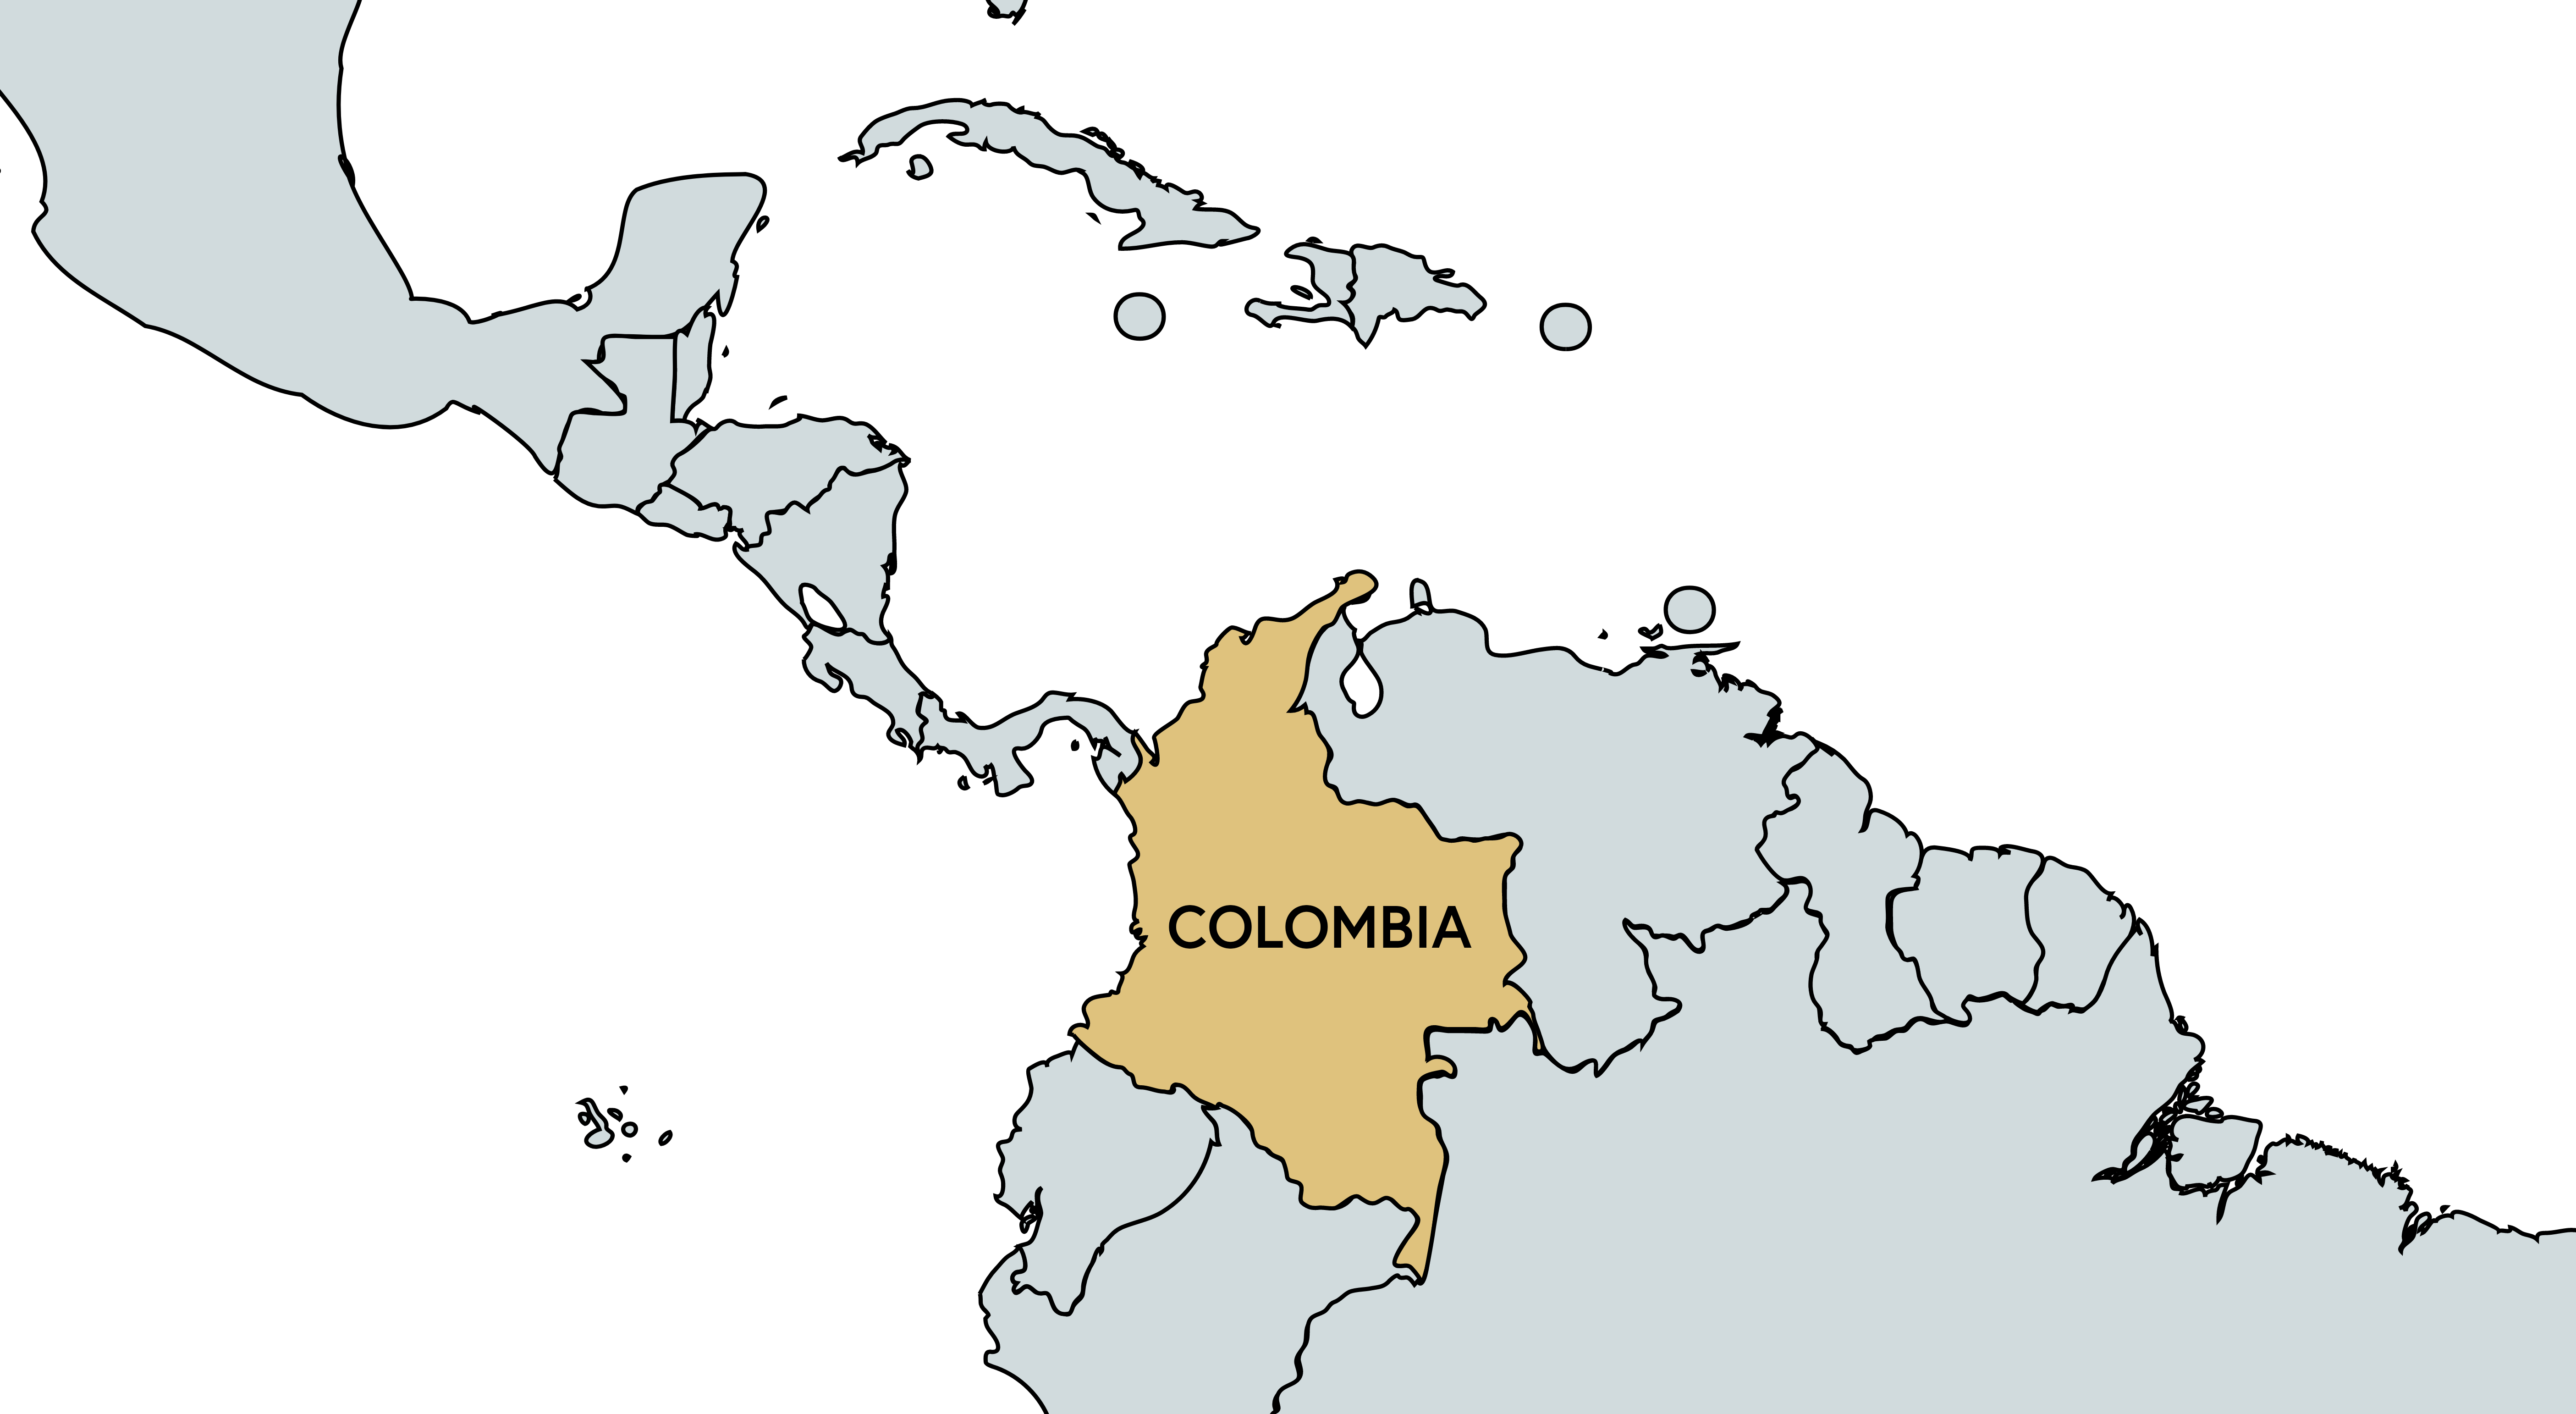 Risk Snapshot - Colombia